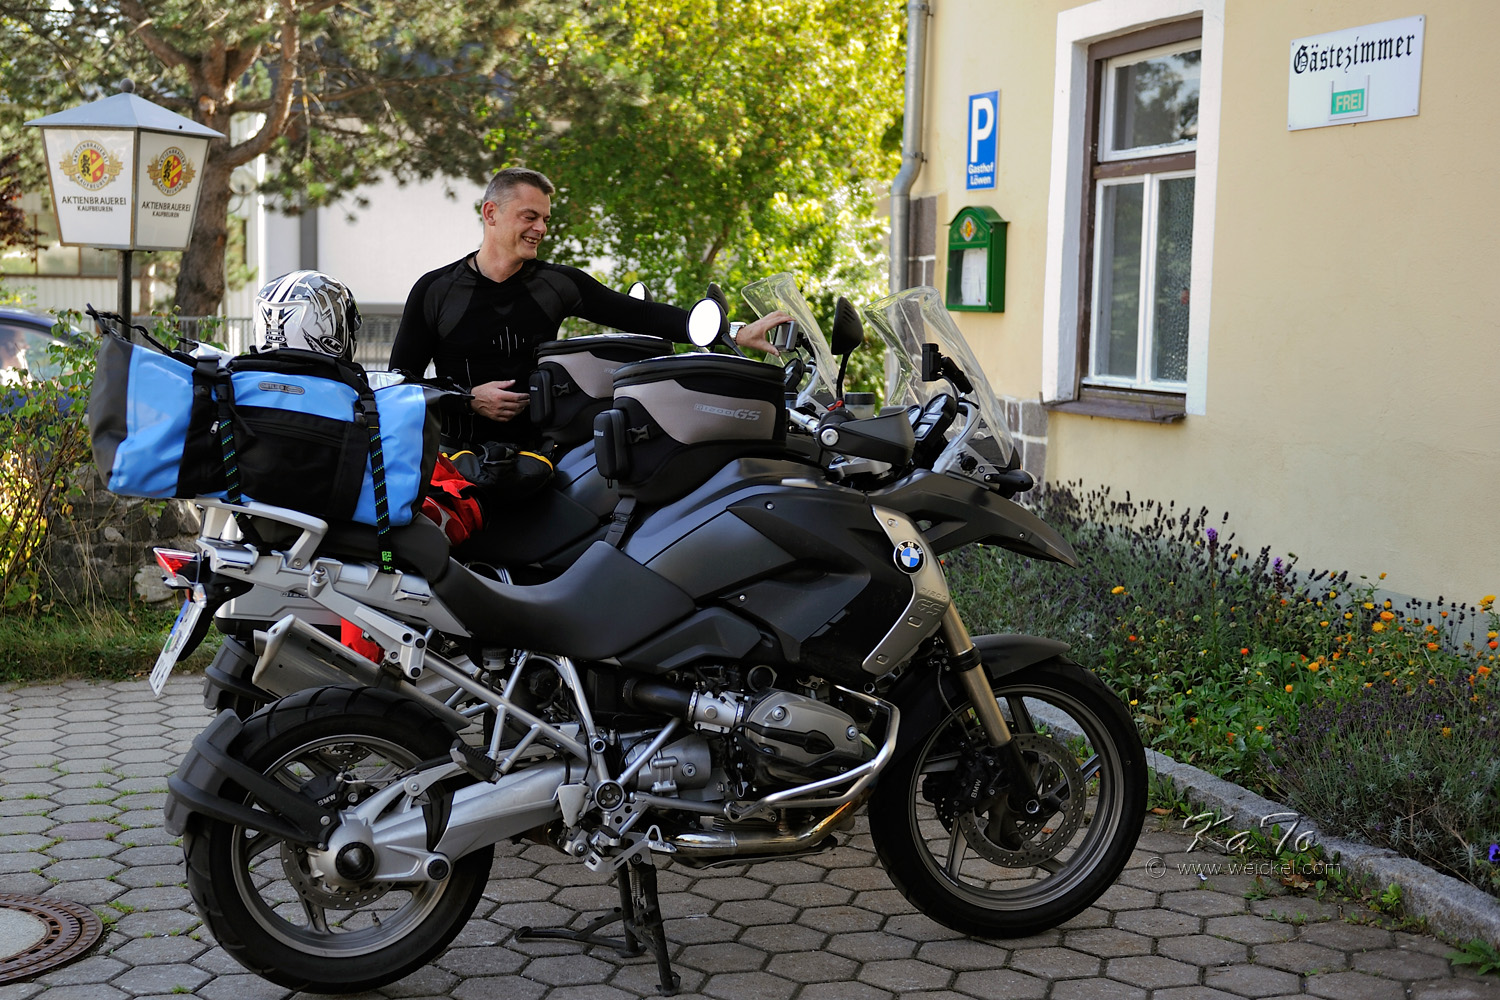 3900km through the Dolomites -  first trip with motorbikes